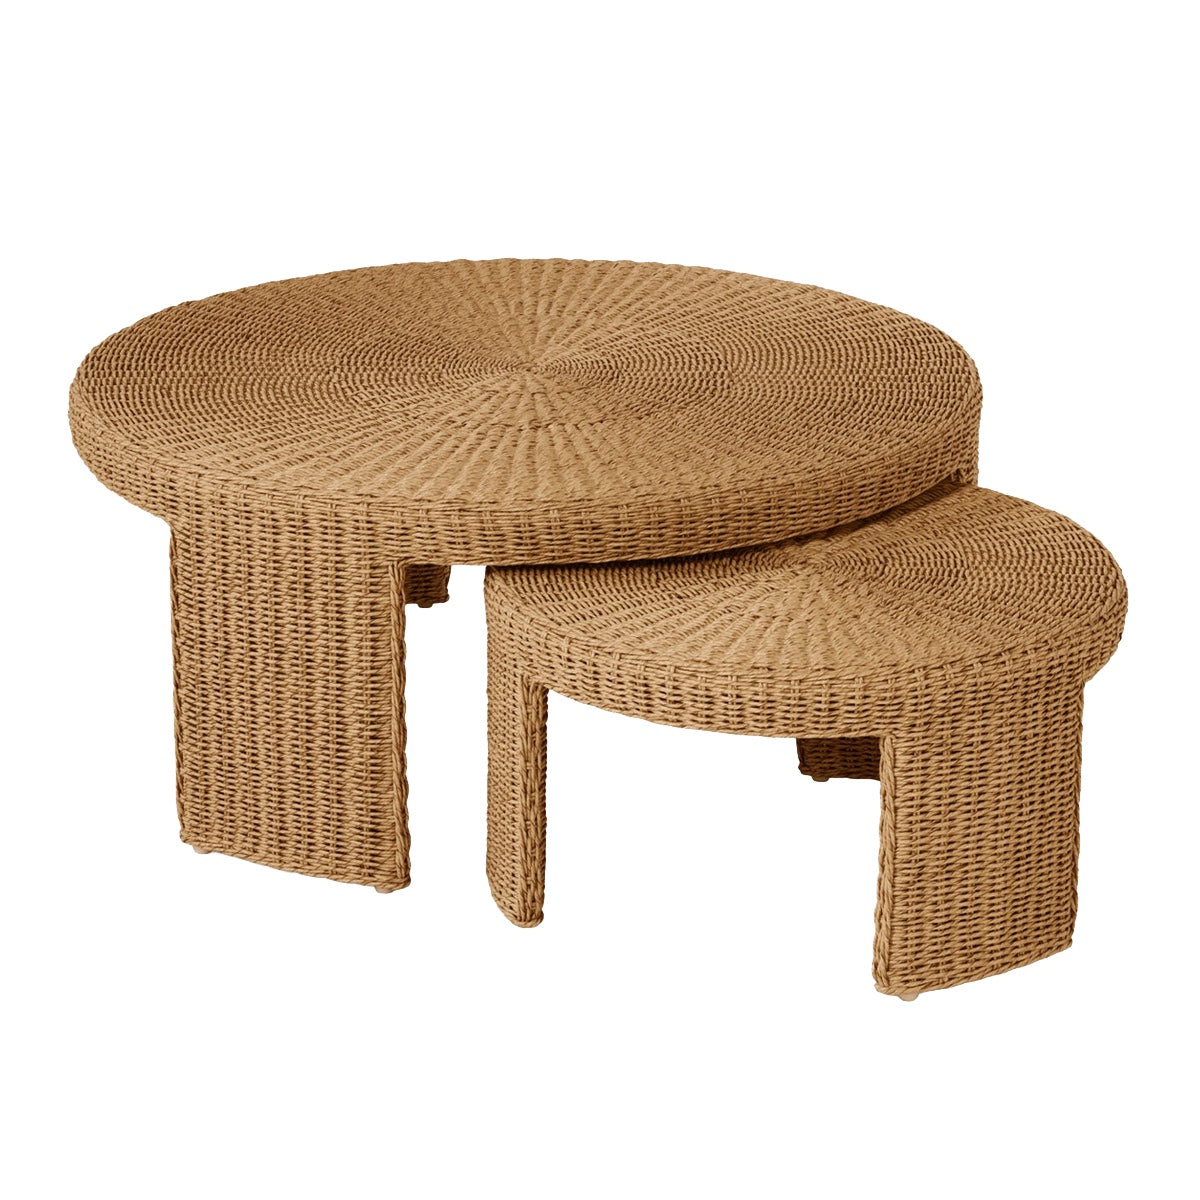 Leroux Nesting Coffee Tables - Natural